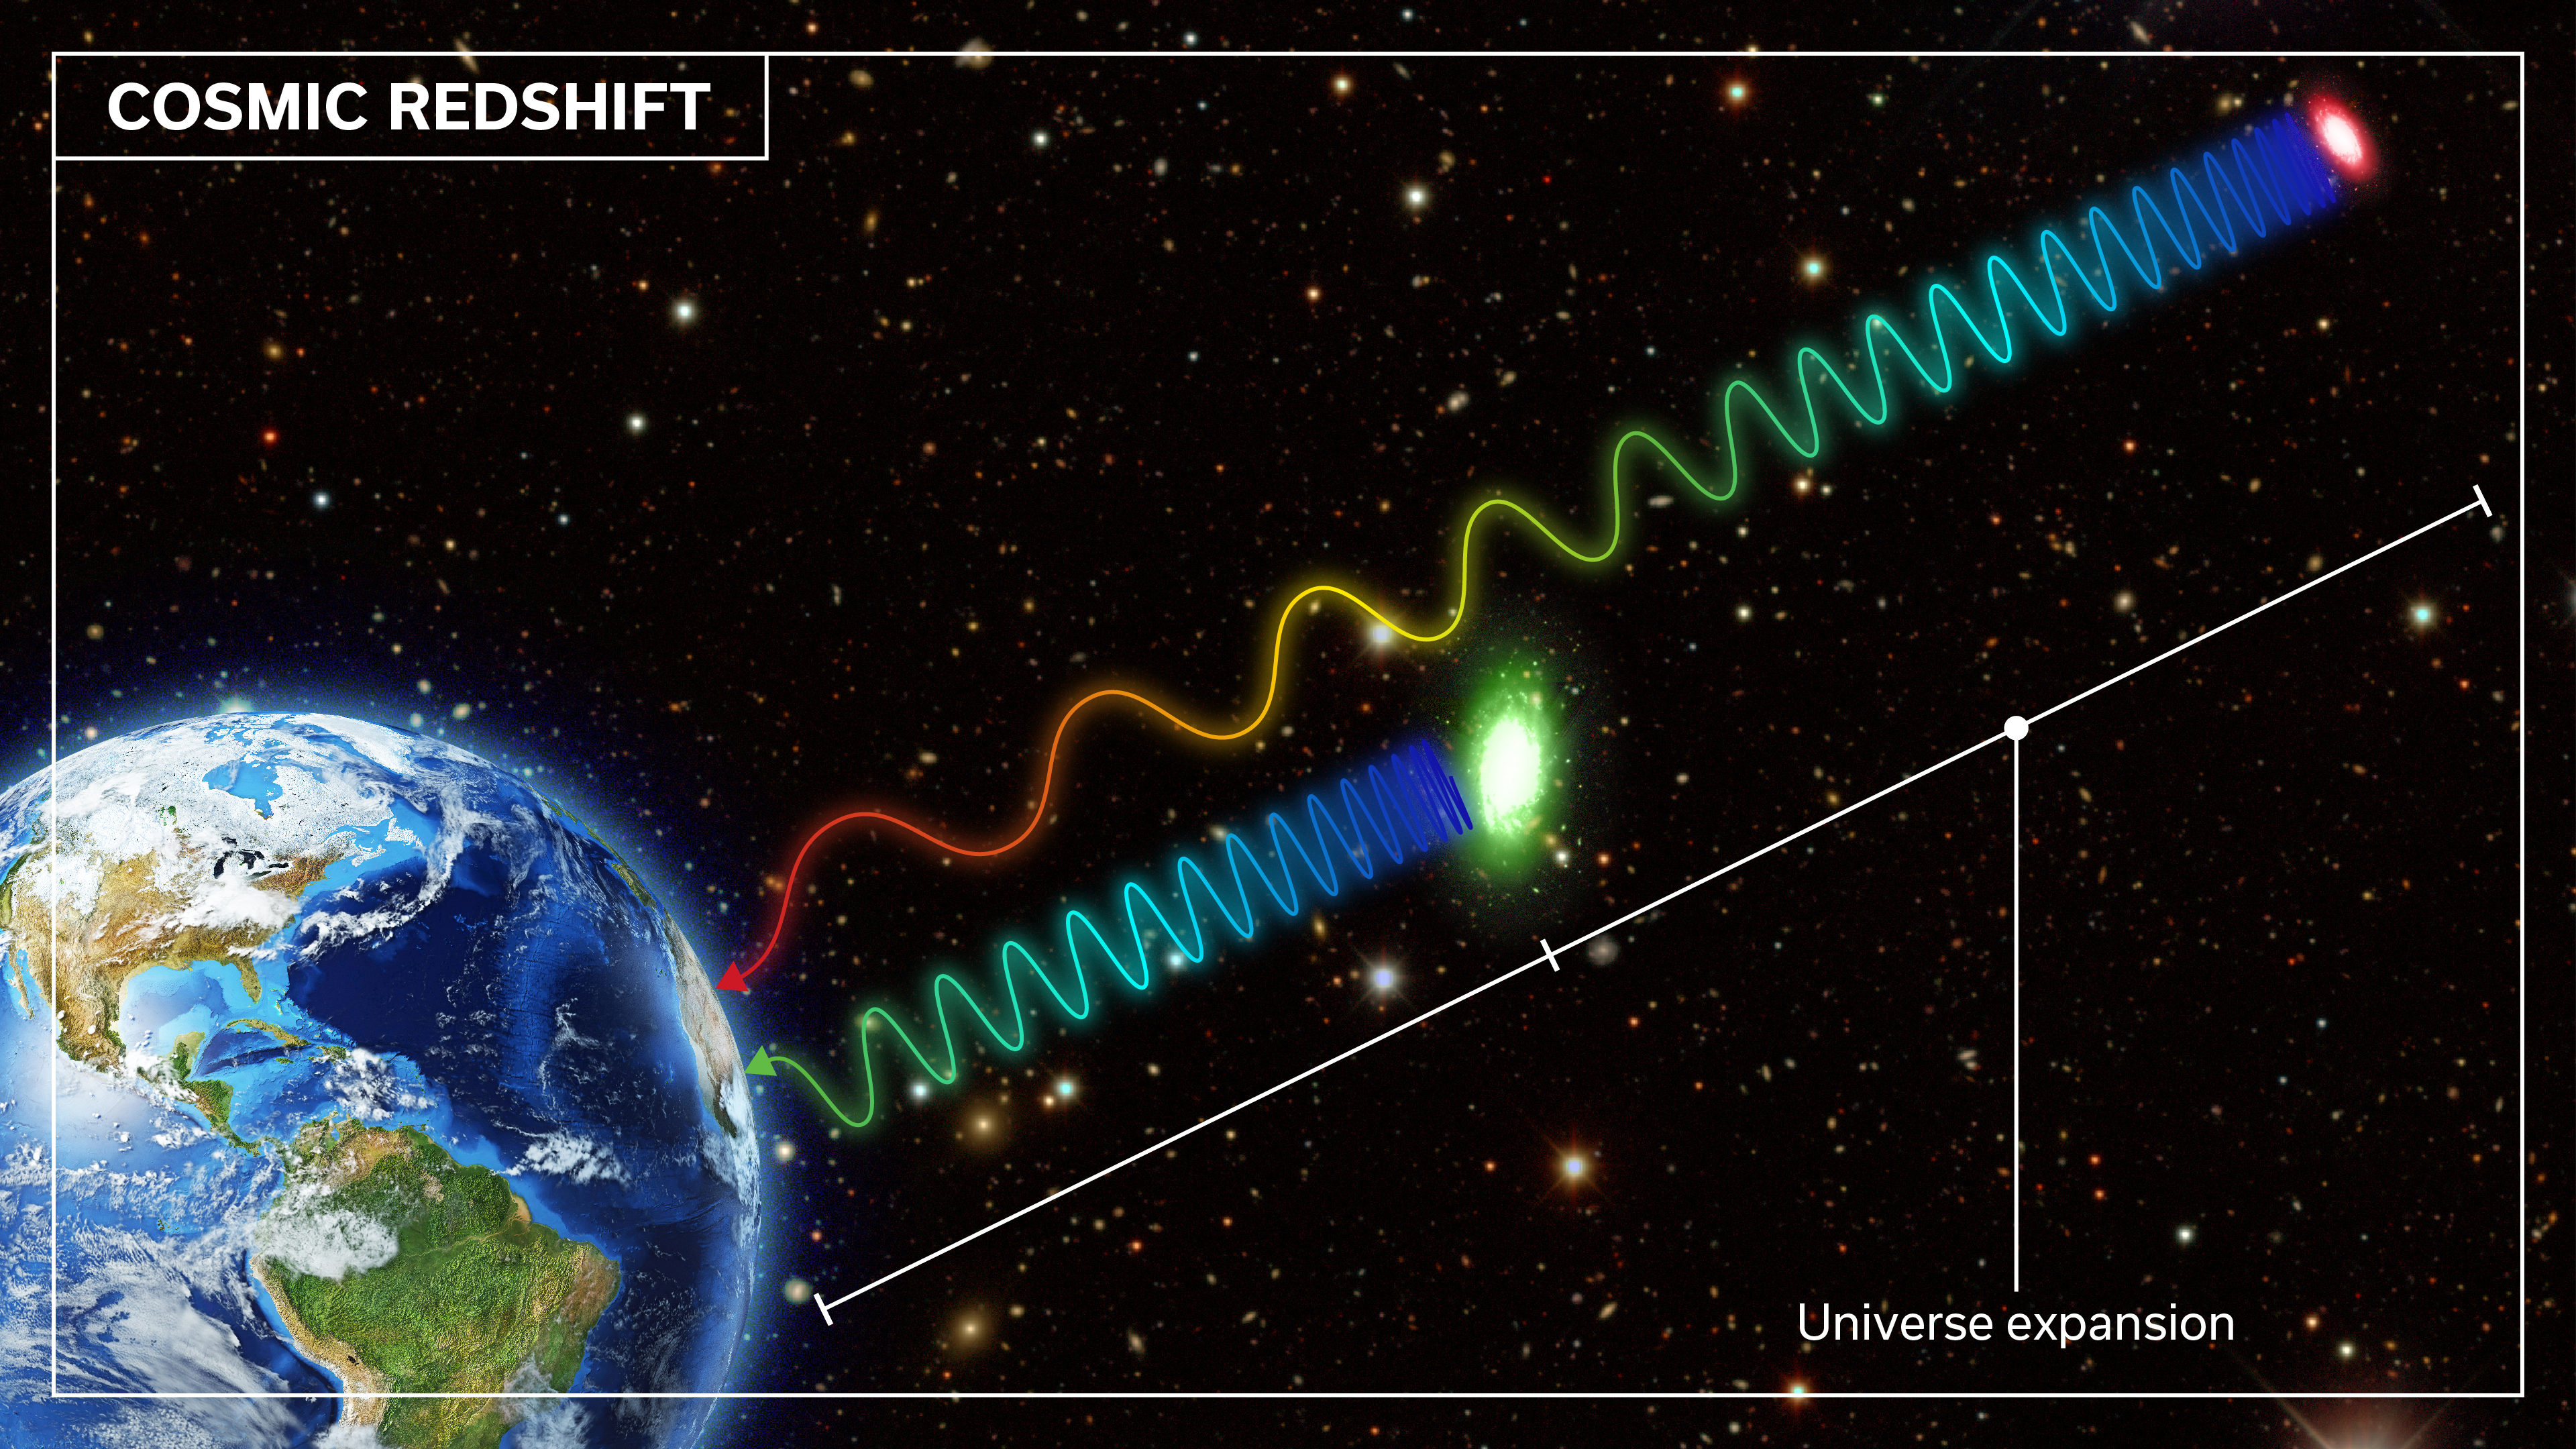 The image illustrates the concept of cosmic redshift with a wave of light starting at Earth and stretching into longer wavelengths as it travels across the star-filled cosmos, symbolizing the universe's expansion.